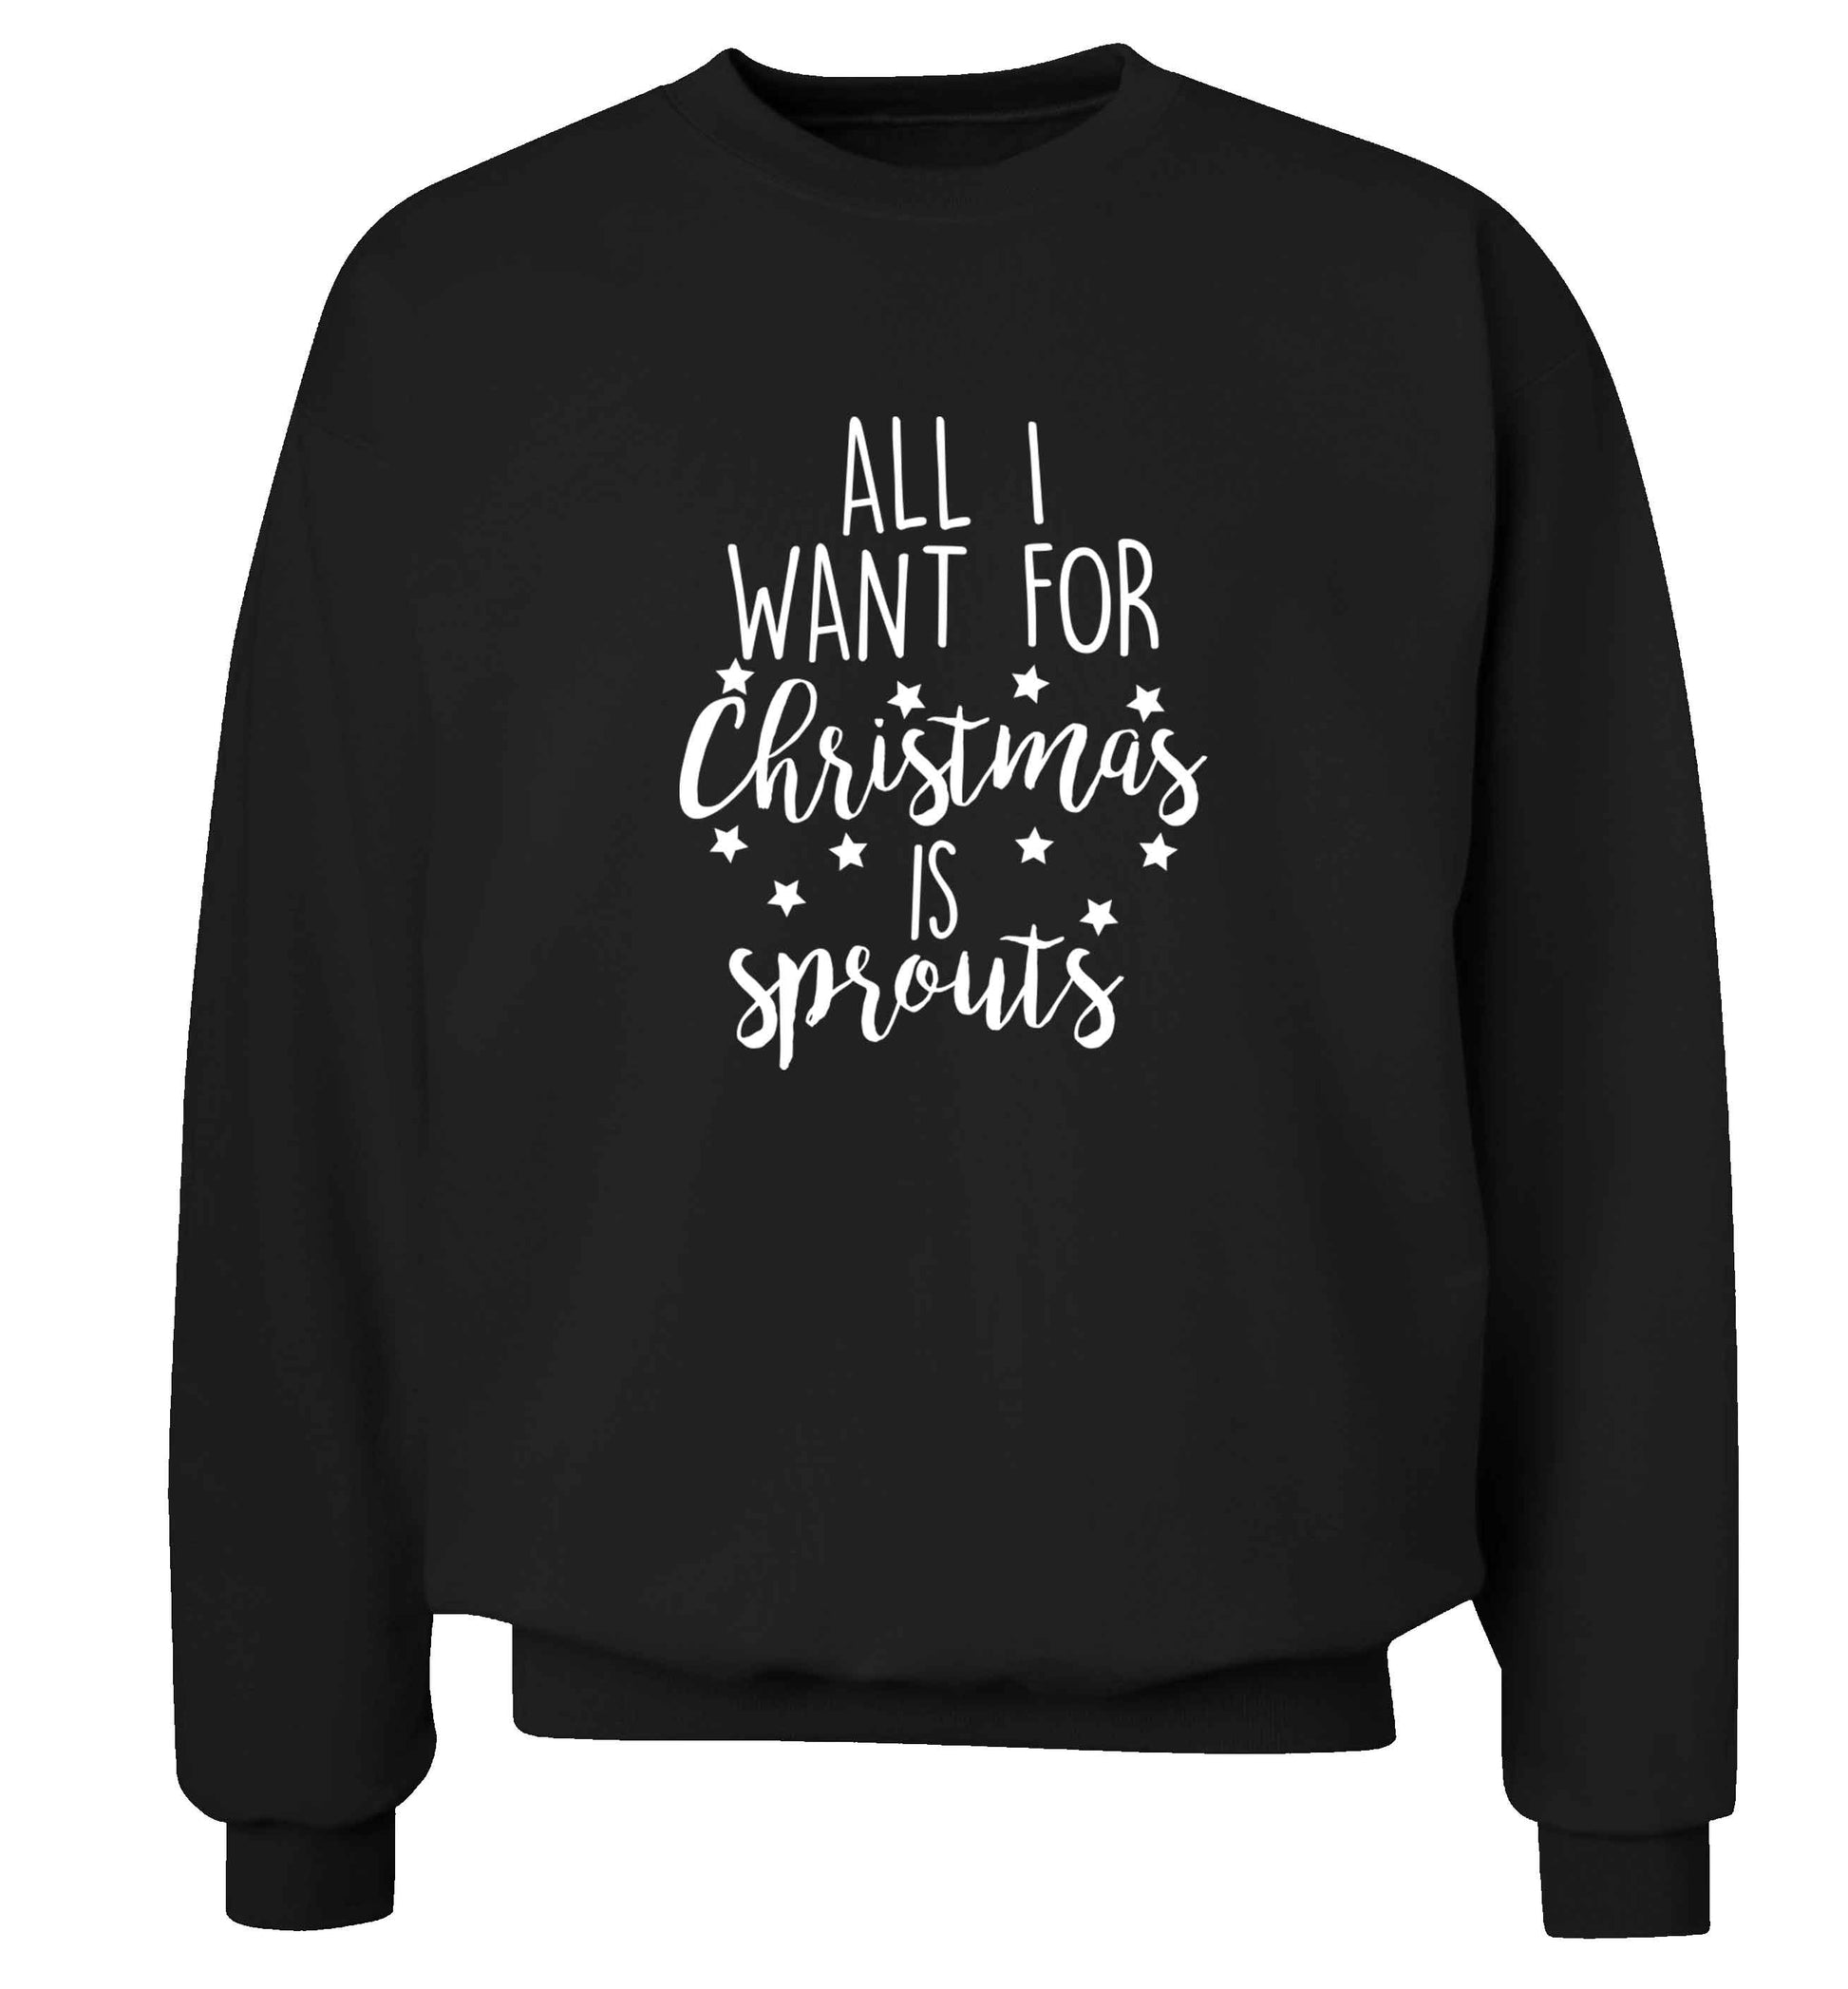 All I want for Christmas is sprouts adult's unisex black sweater 2XL